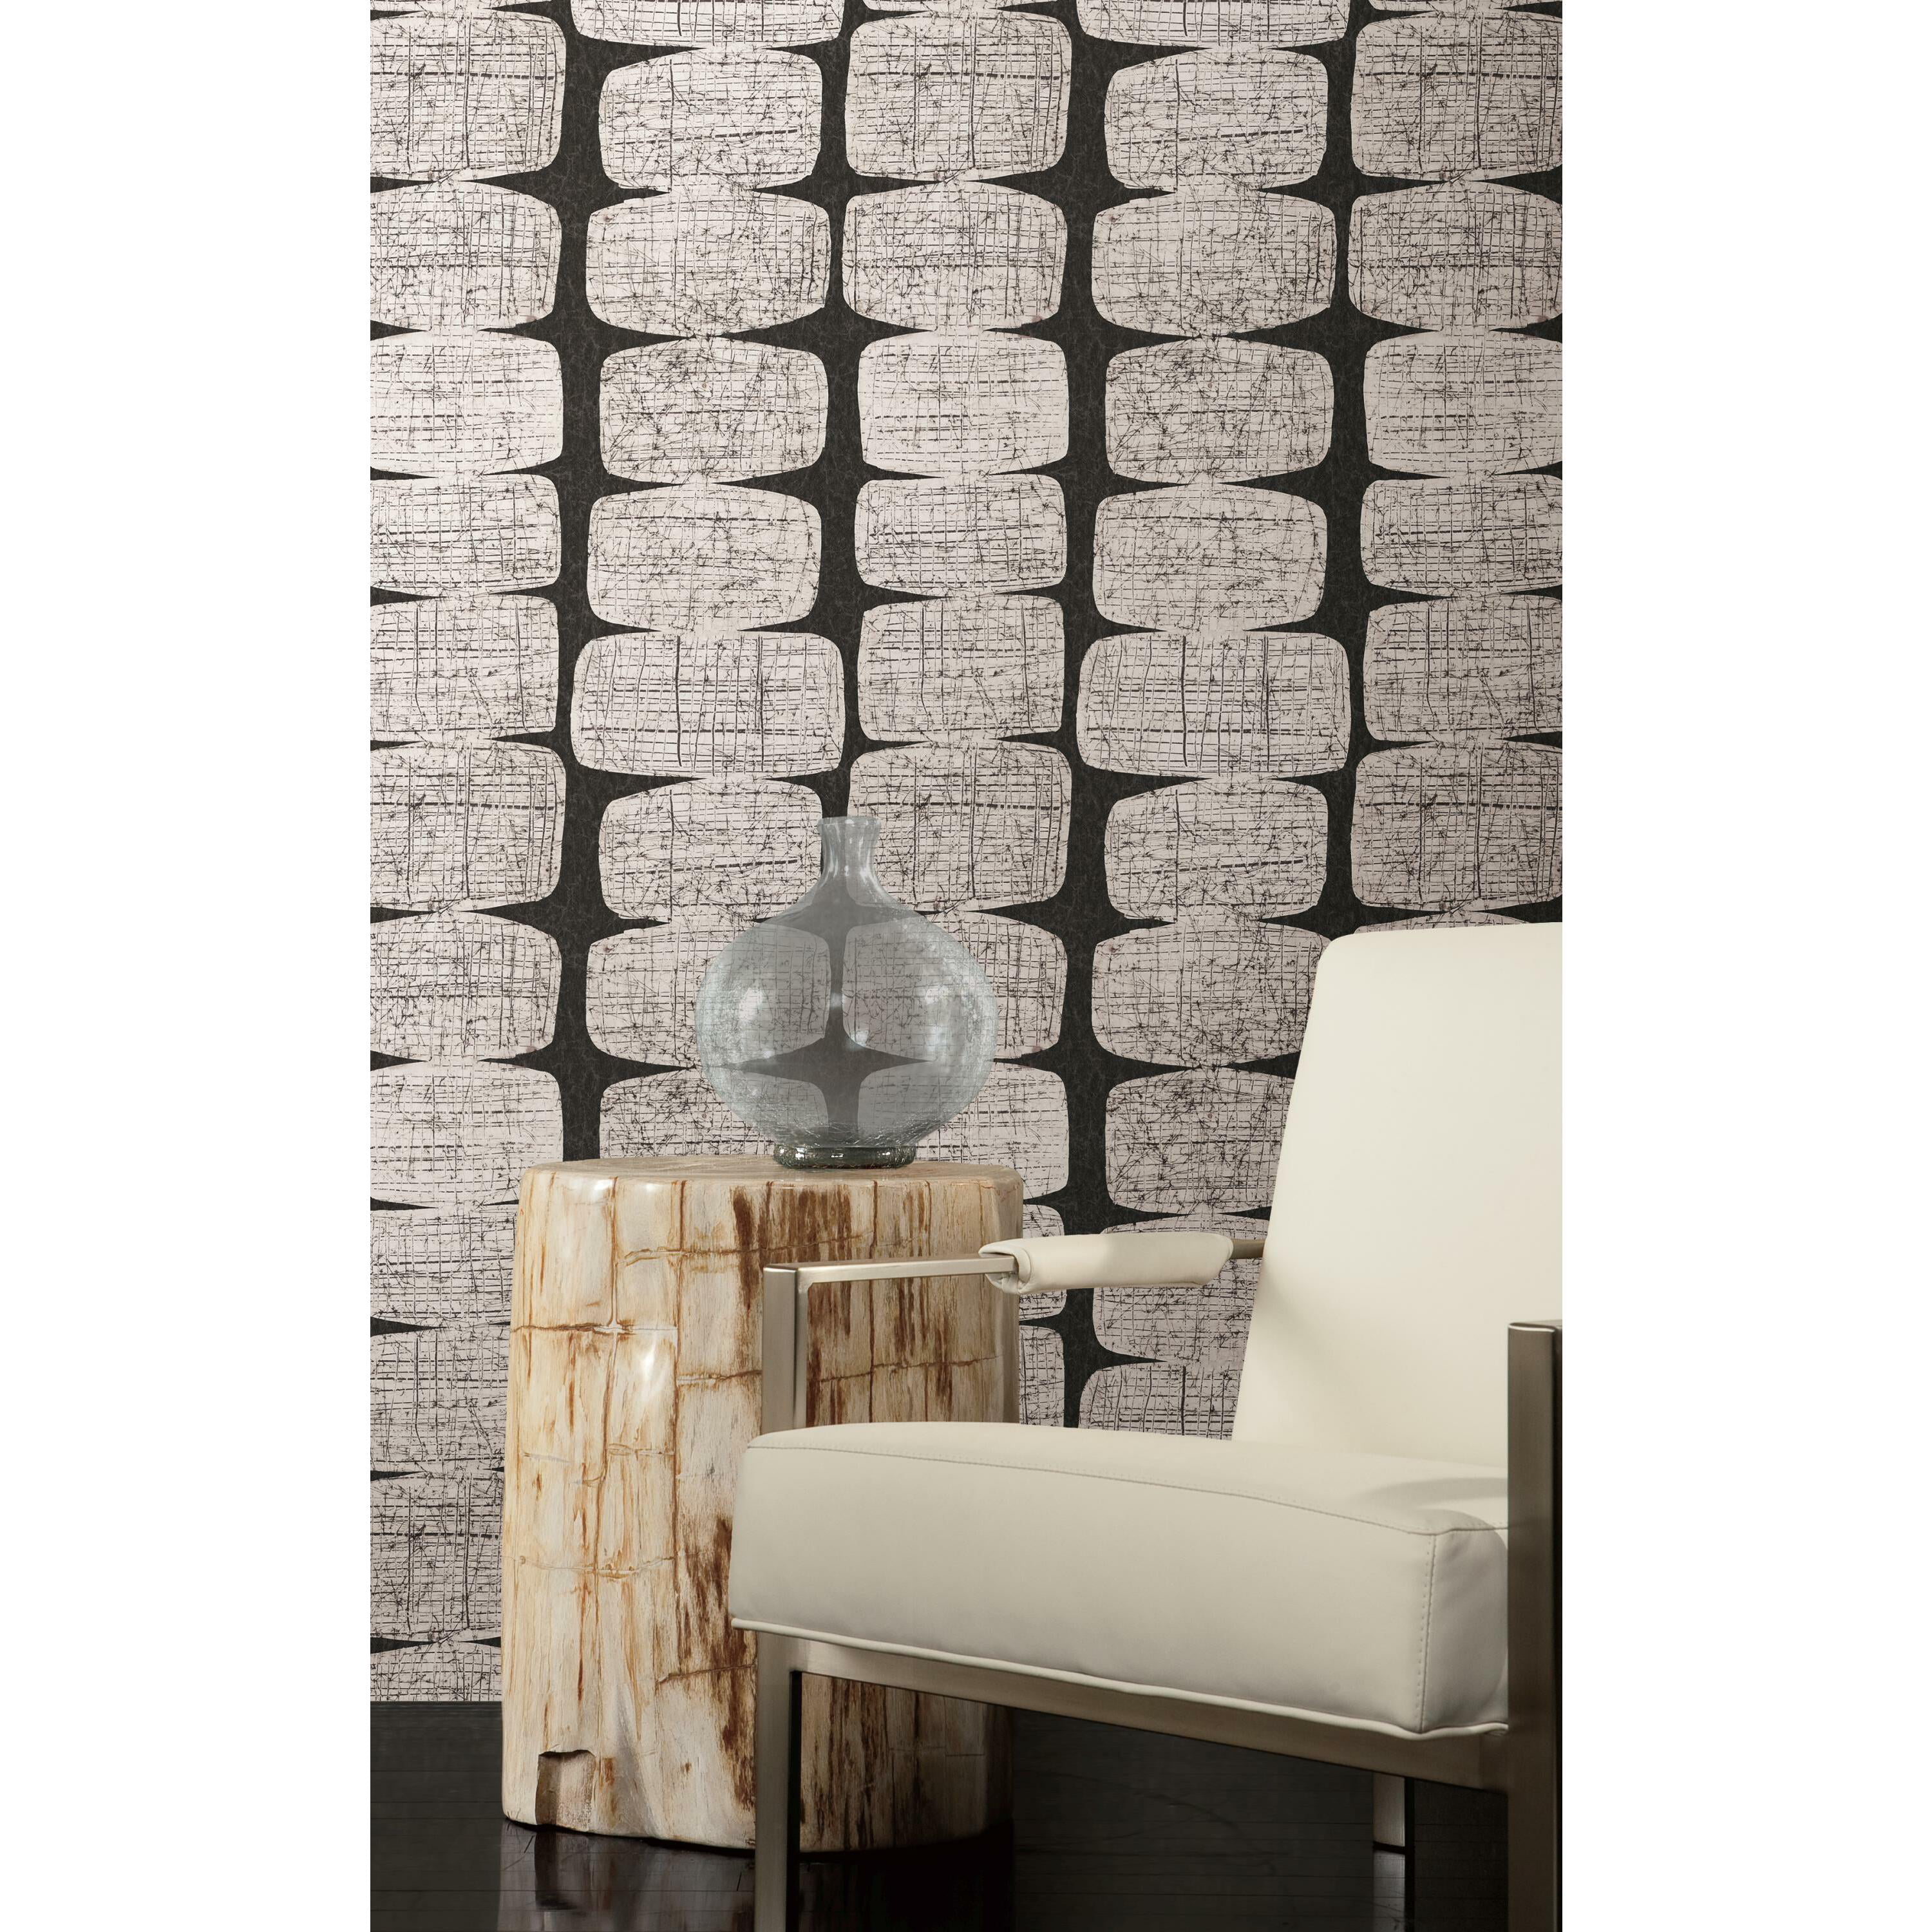 RoomMates Mid-Century Beads Gray Abstract Peel and Stick Wallpaper